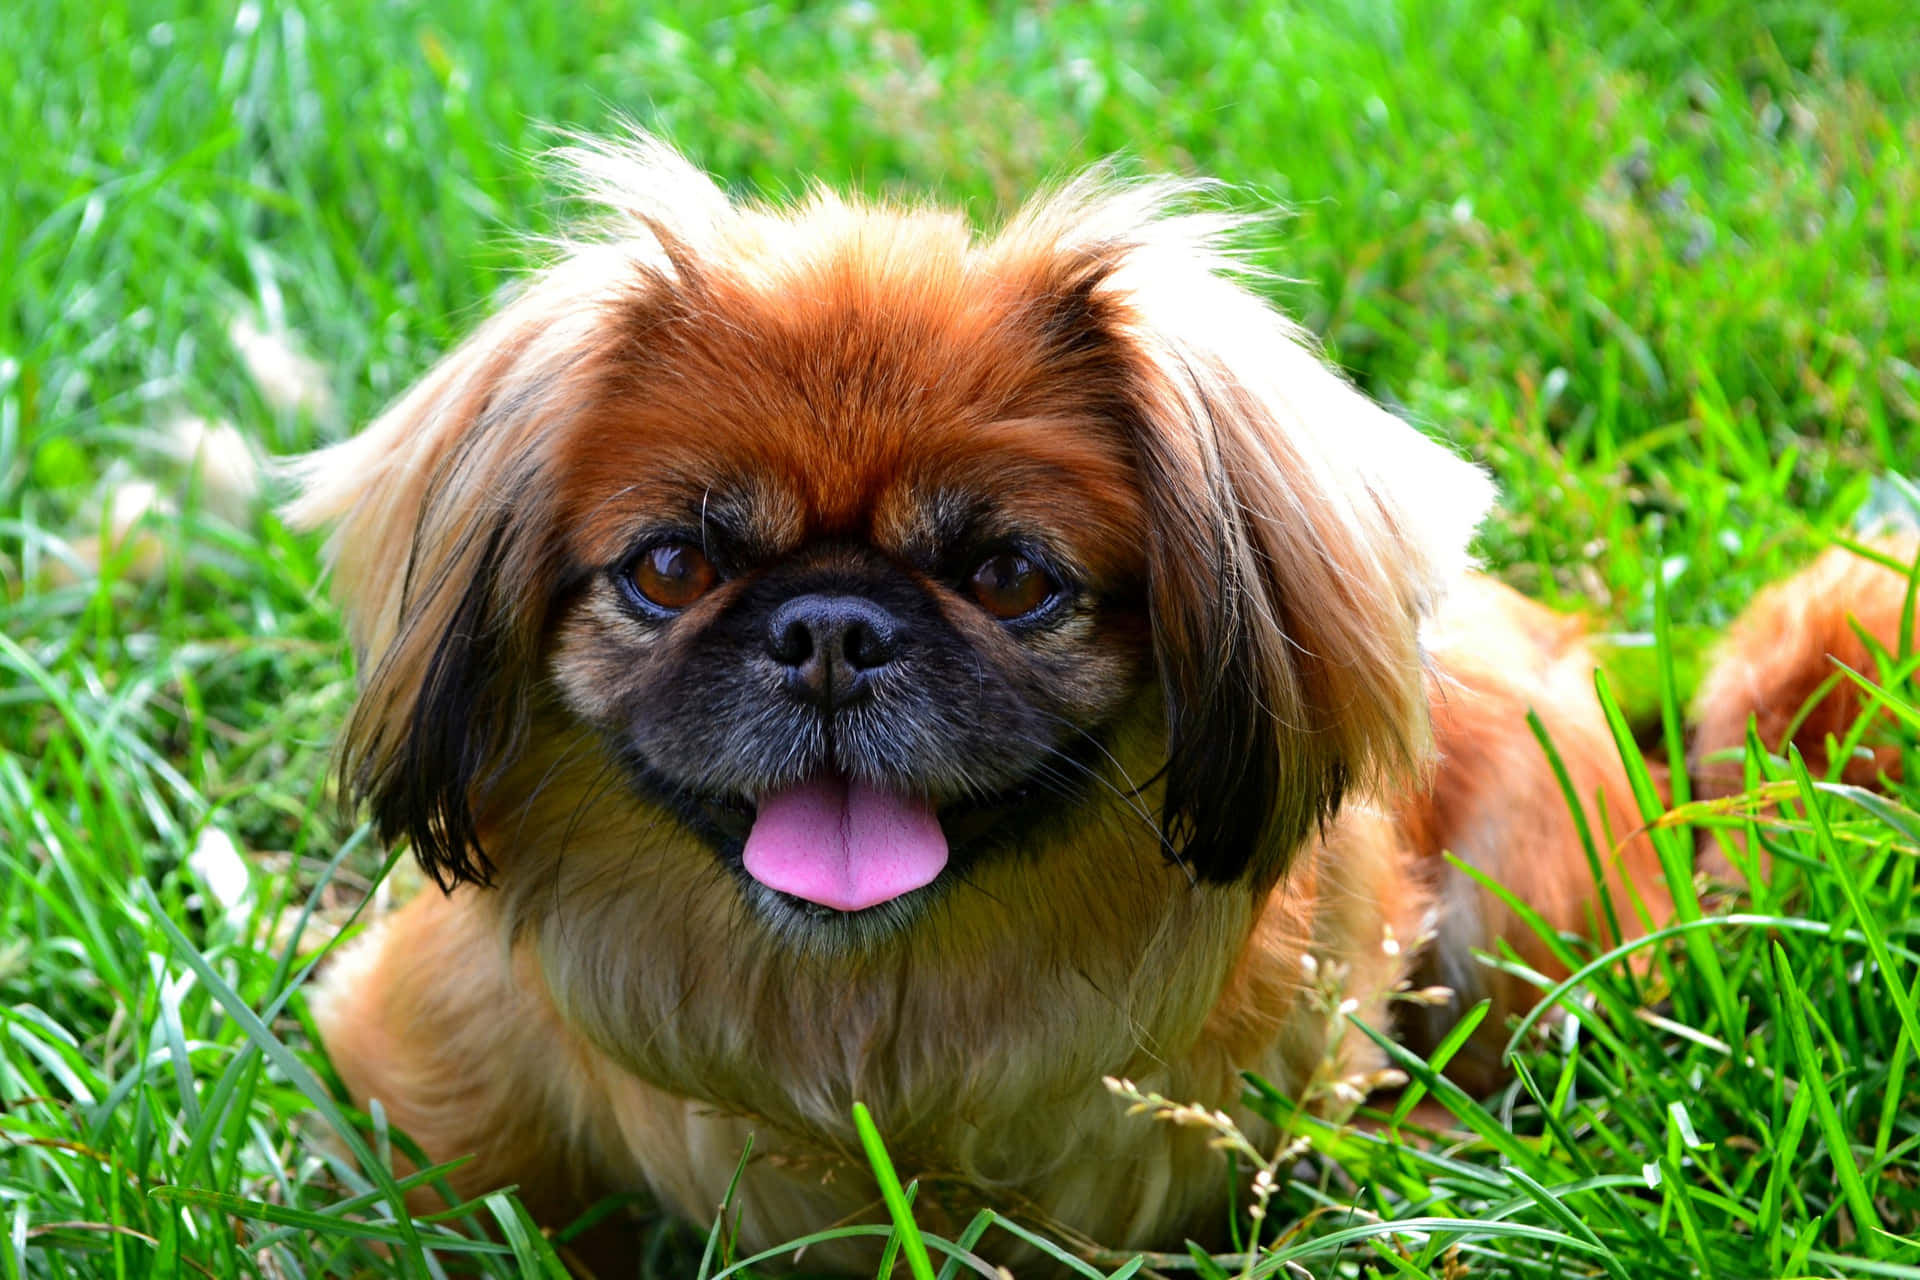 An adorable Pekingese looking up with bright eyes